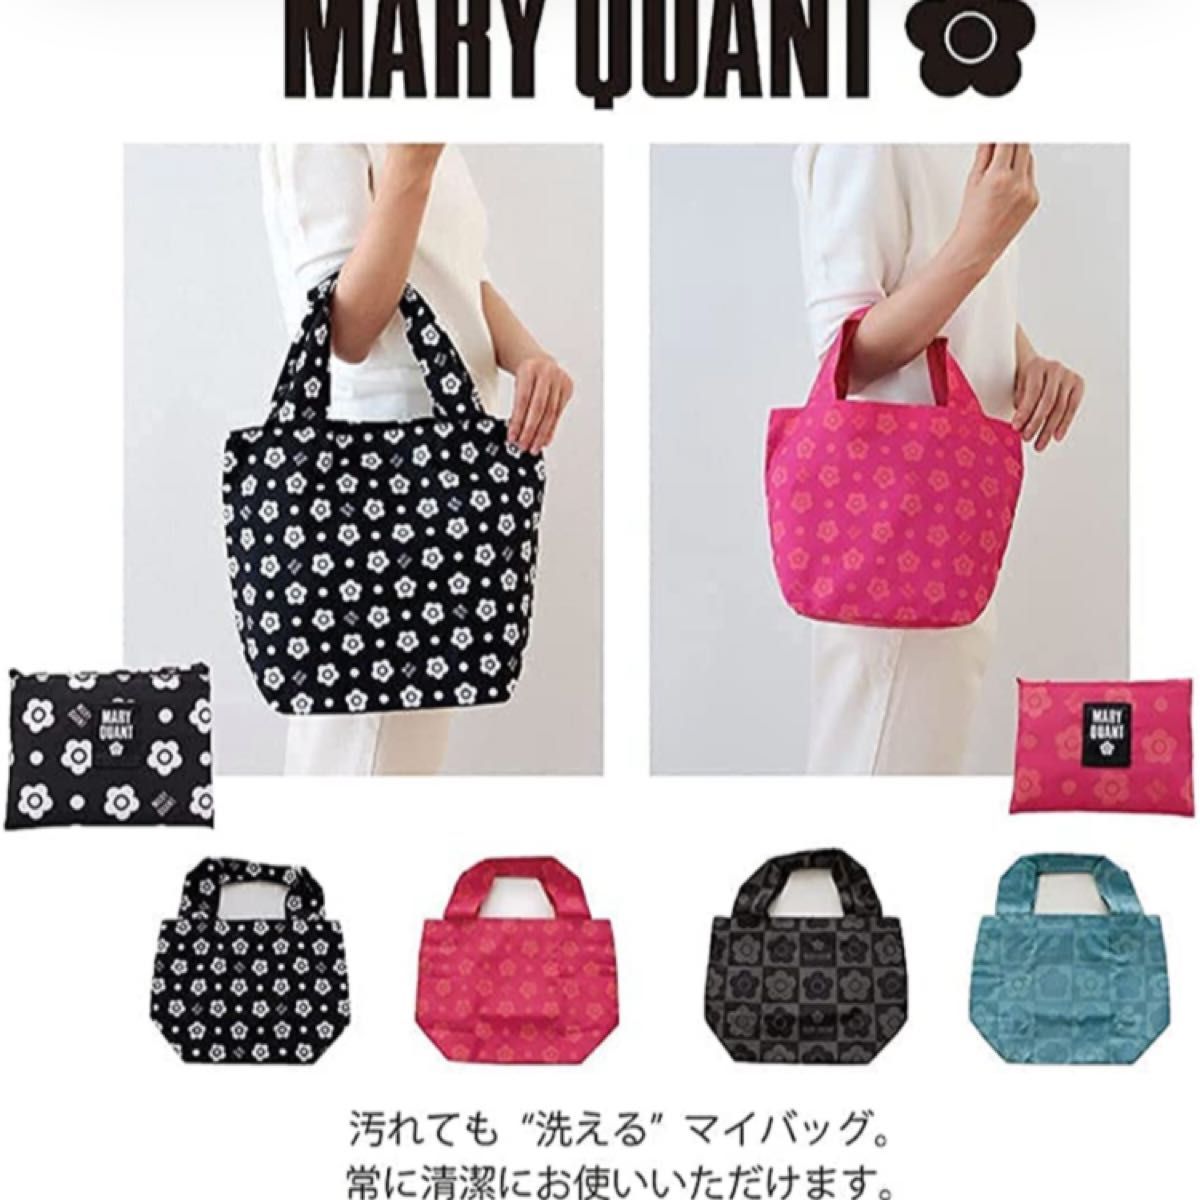 MARY QUANT マリークワント エコバック - バッグ